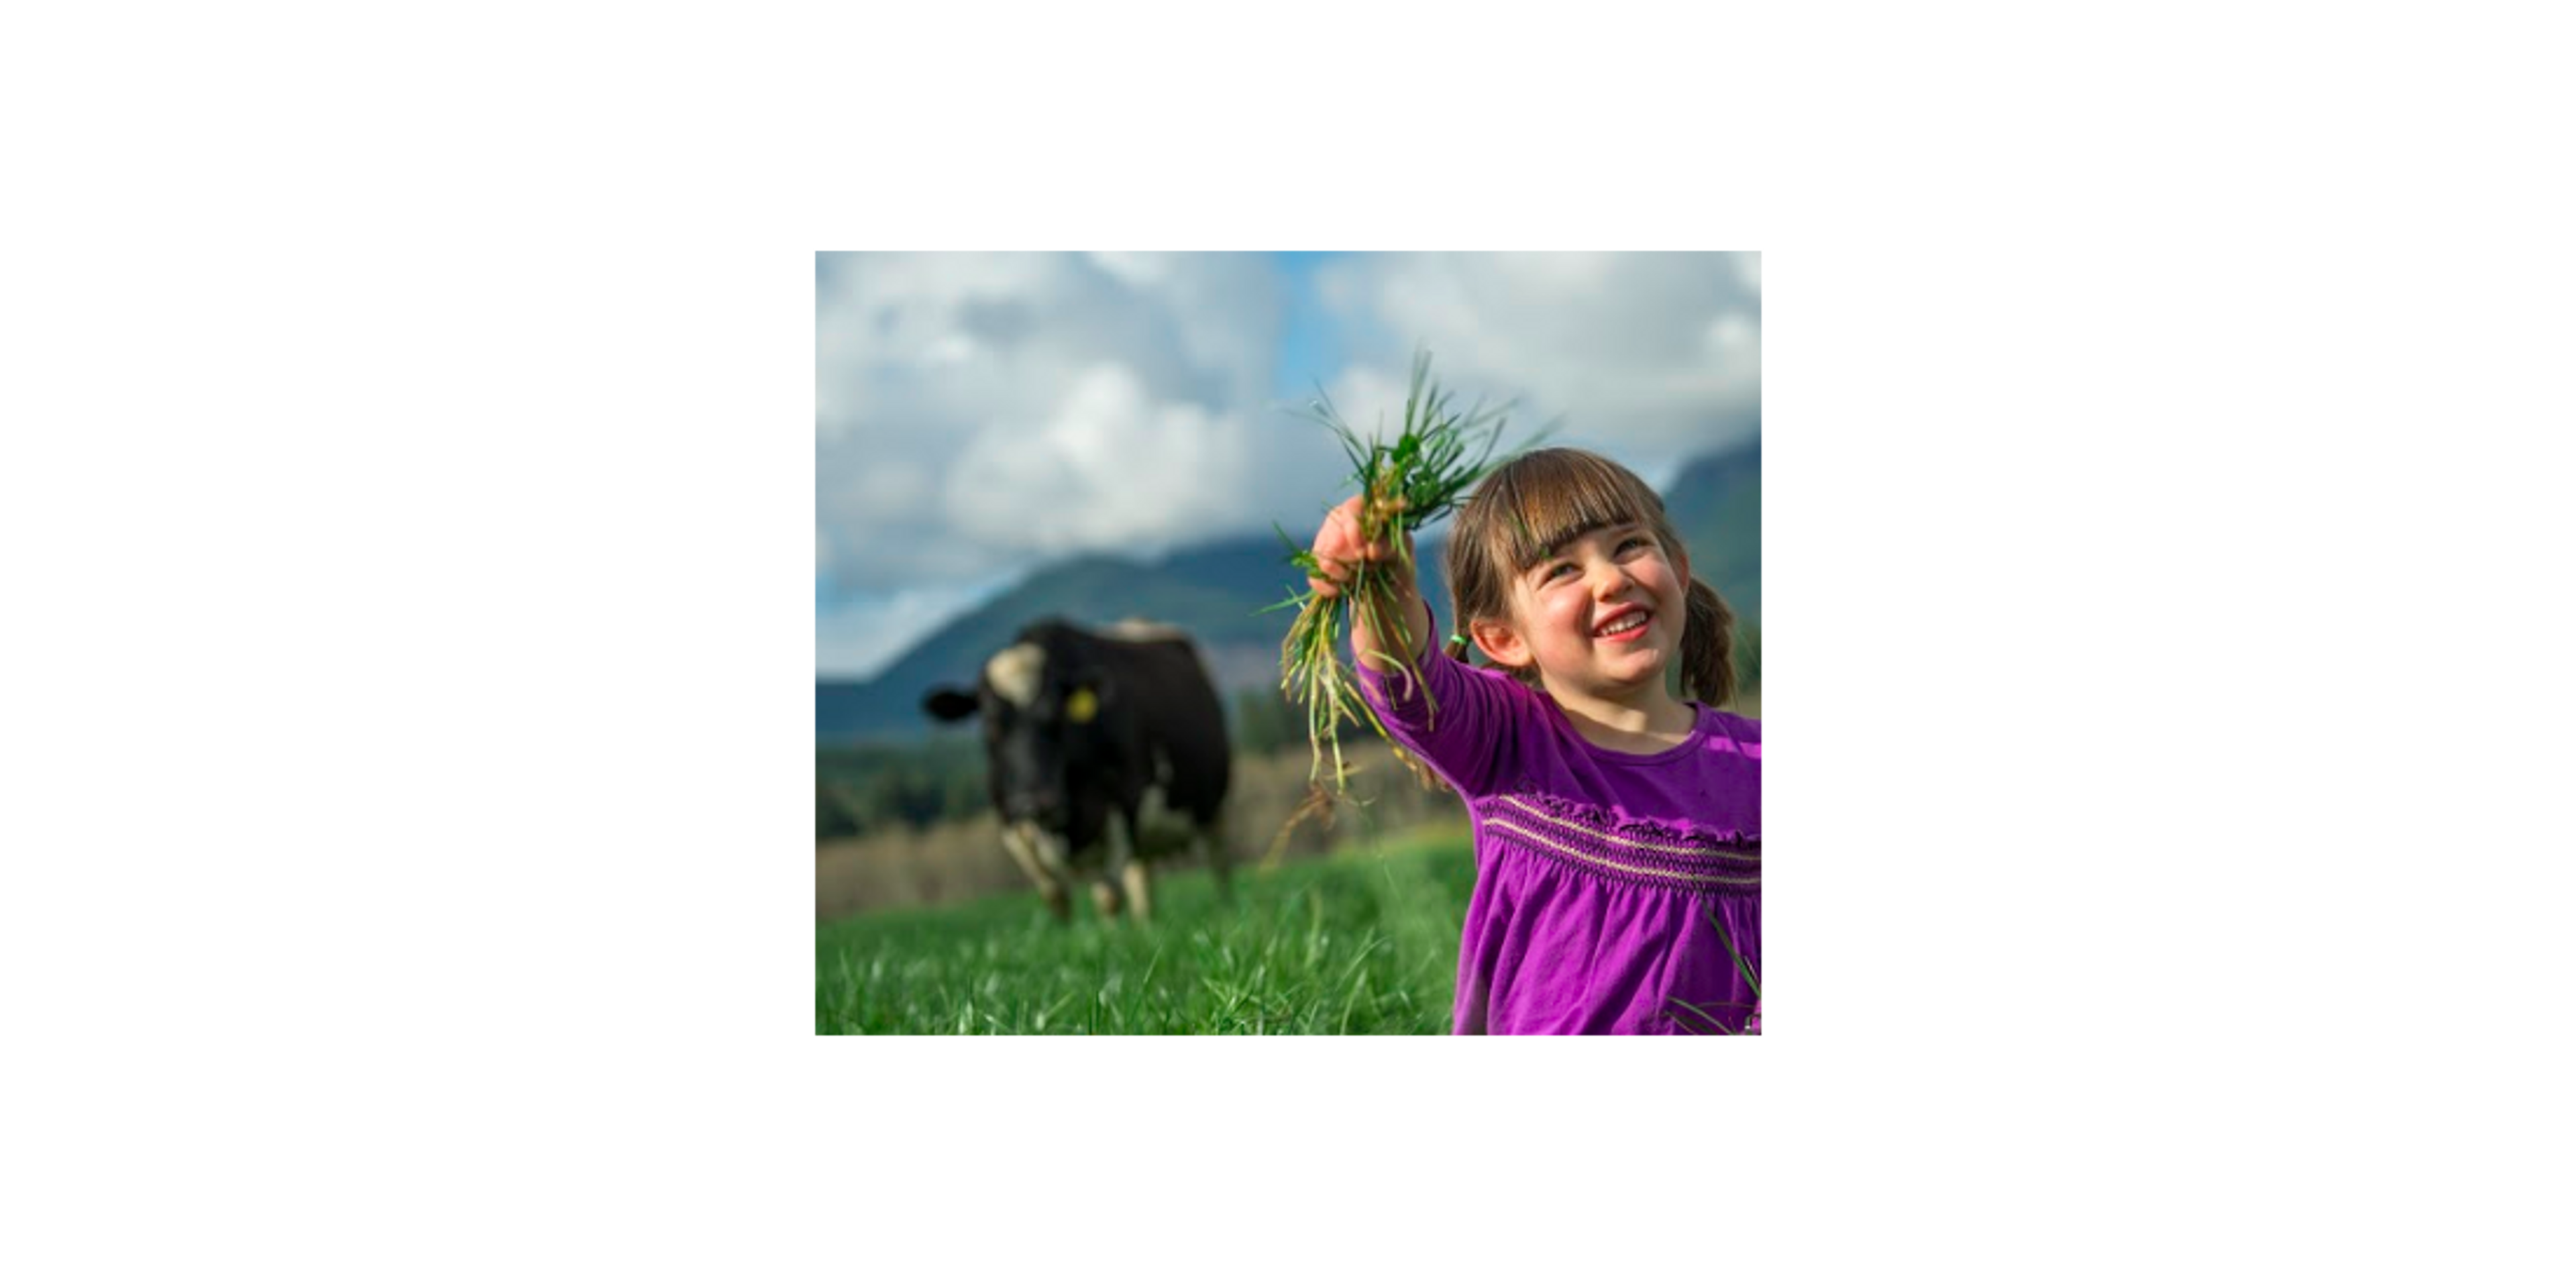 Same view of girl holding grass, slightly zoomed in on the creepy cow looming in the background.